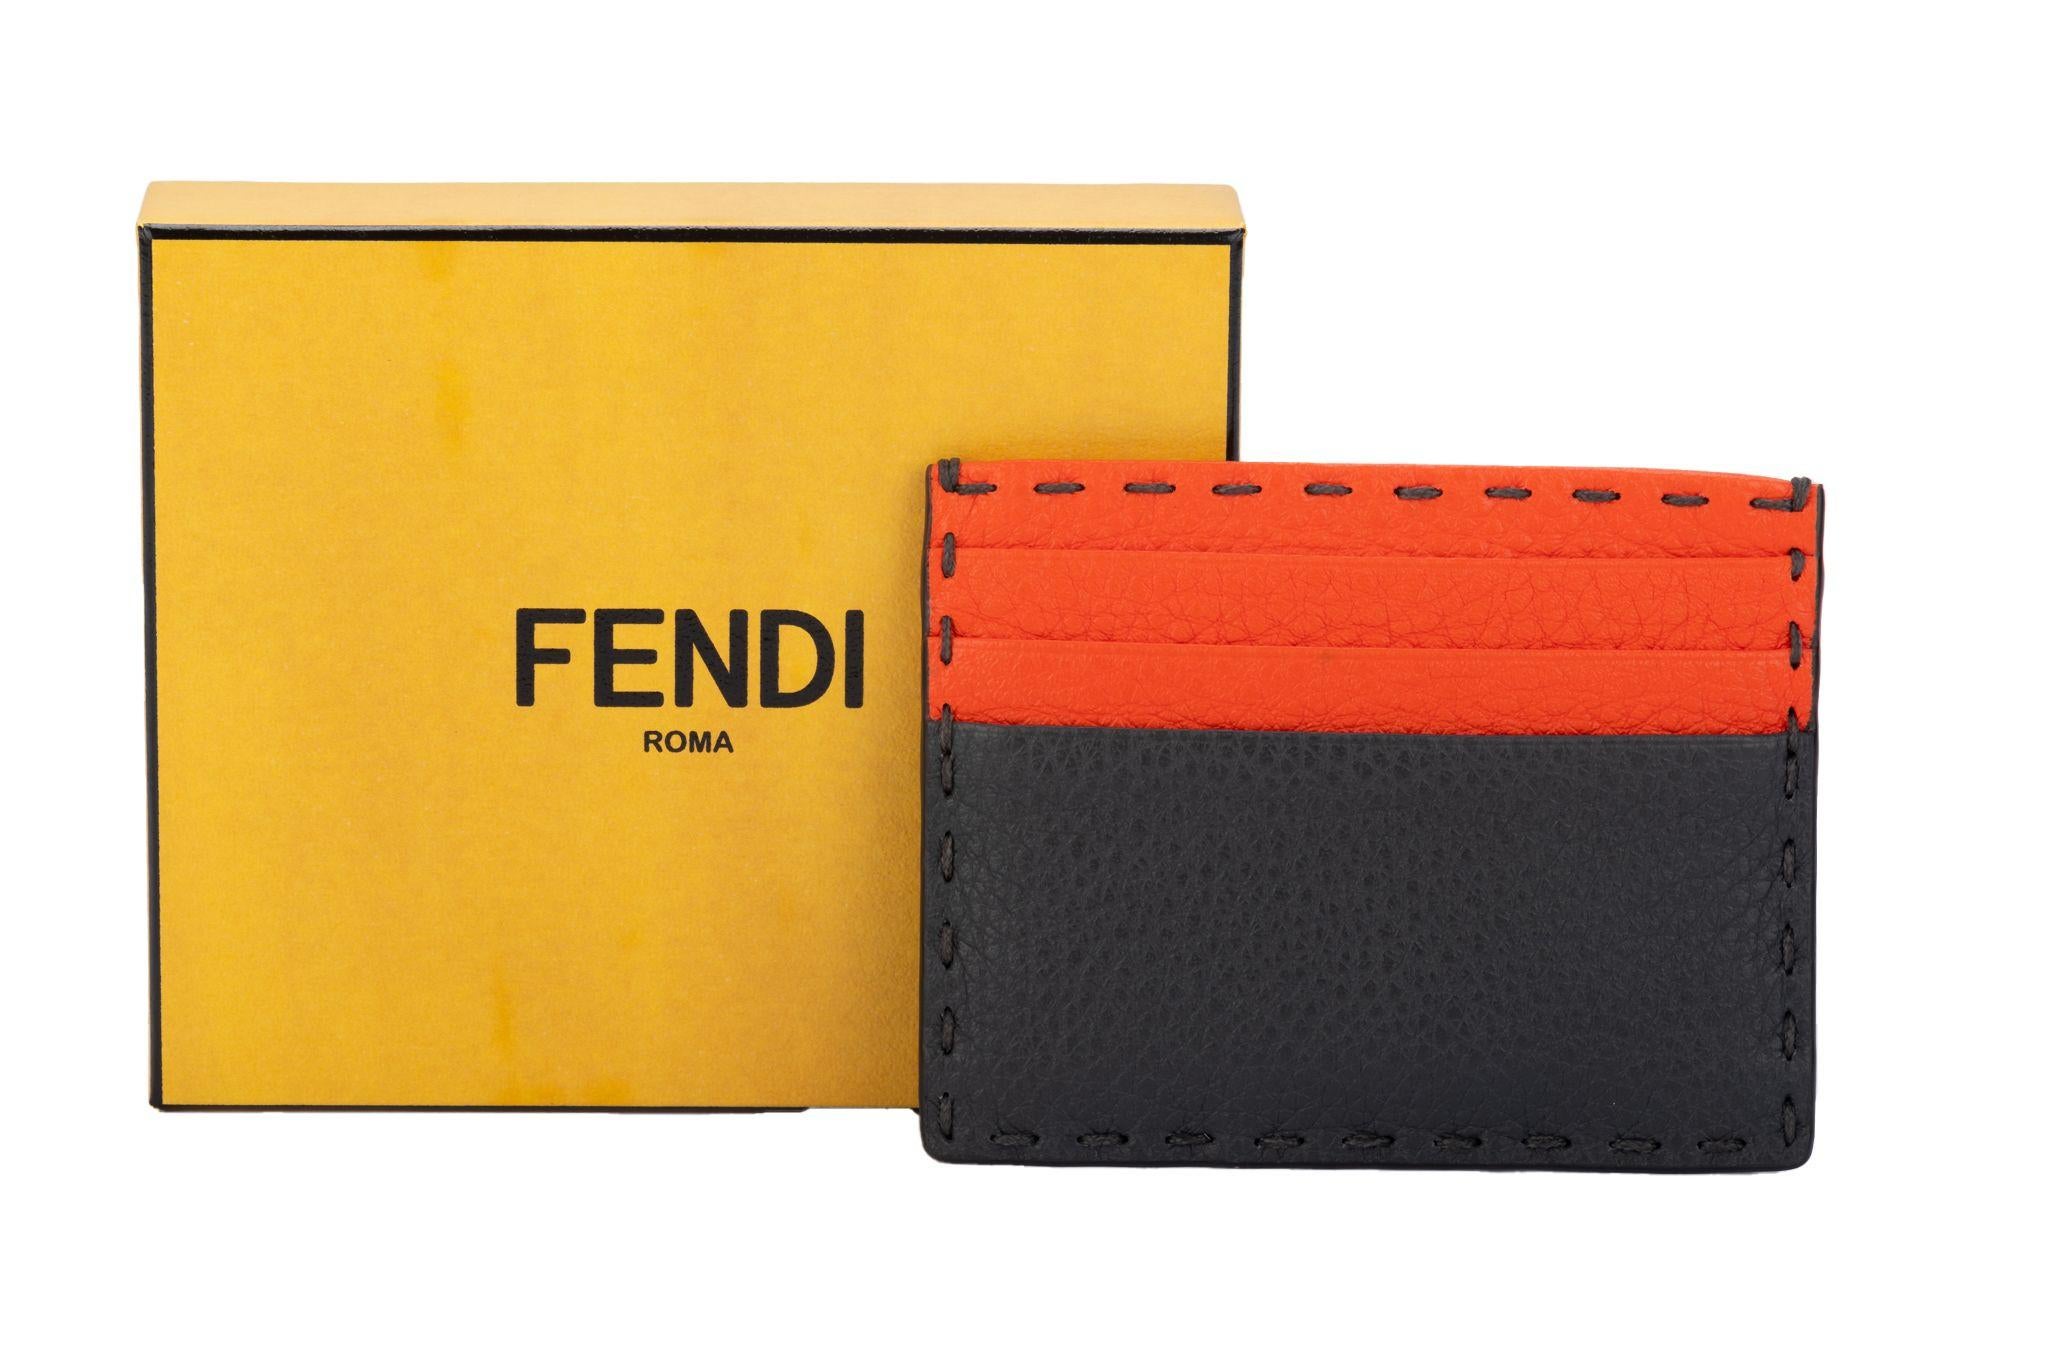 Fendi new limited edition selleria hand stitched two tone credit card wallet. Grey and coral leather. Box and original dustcover.